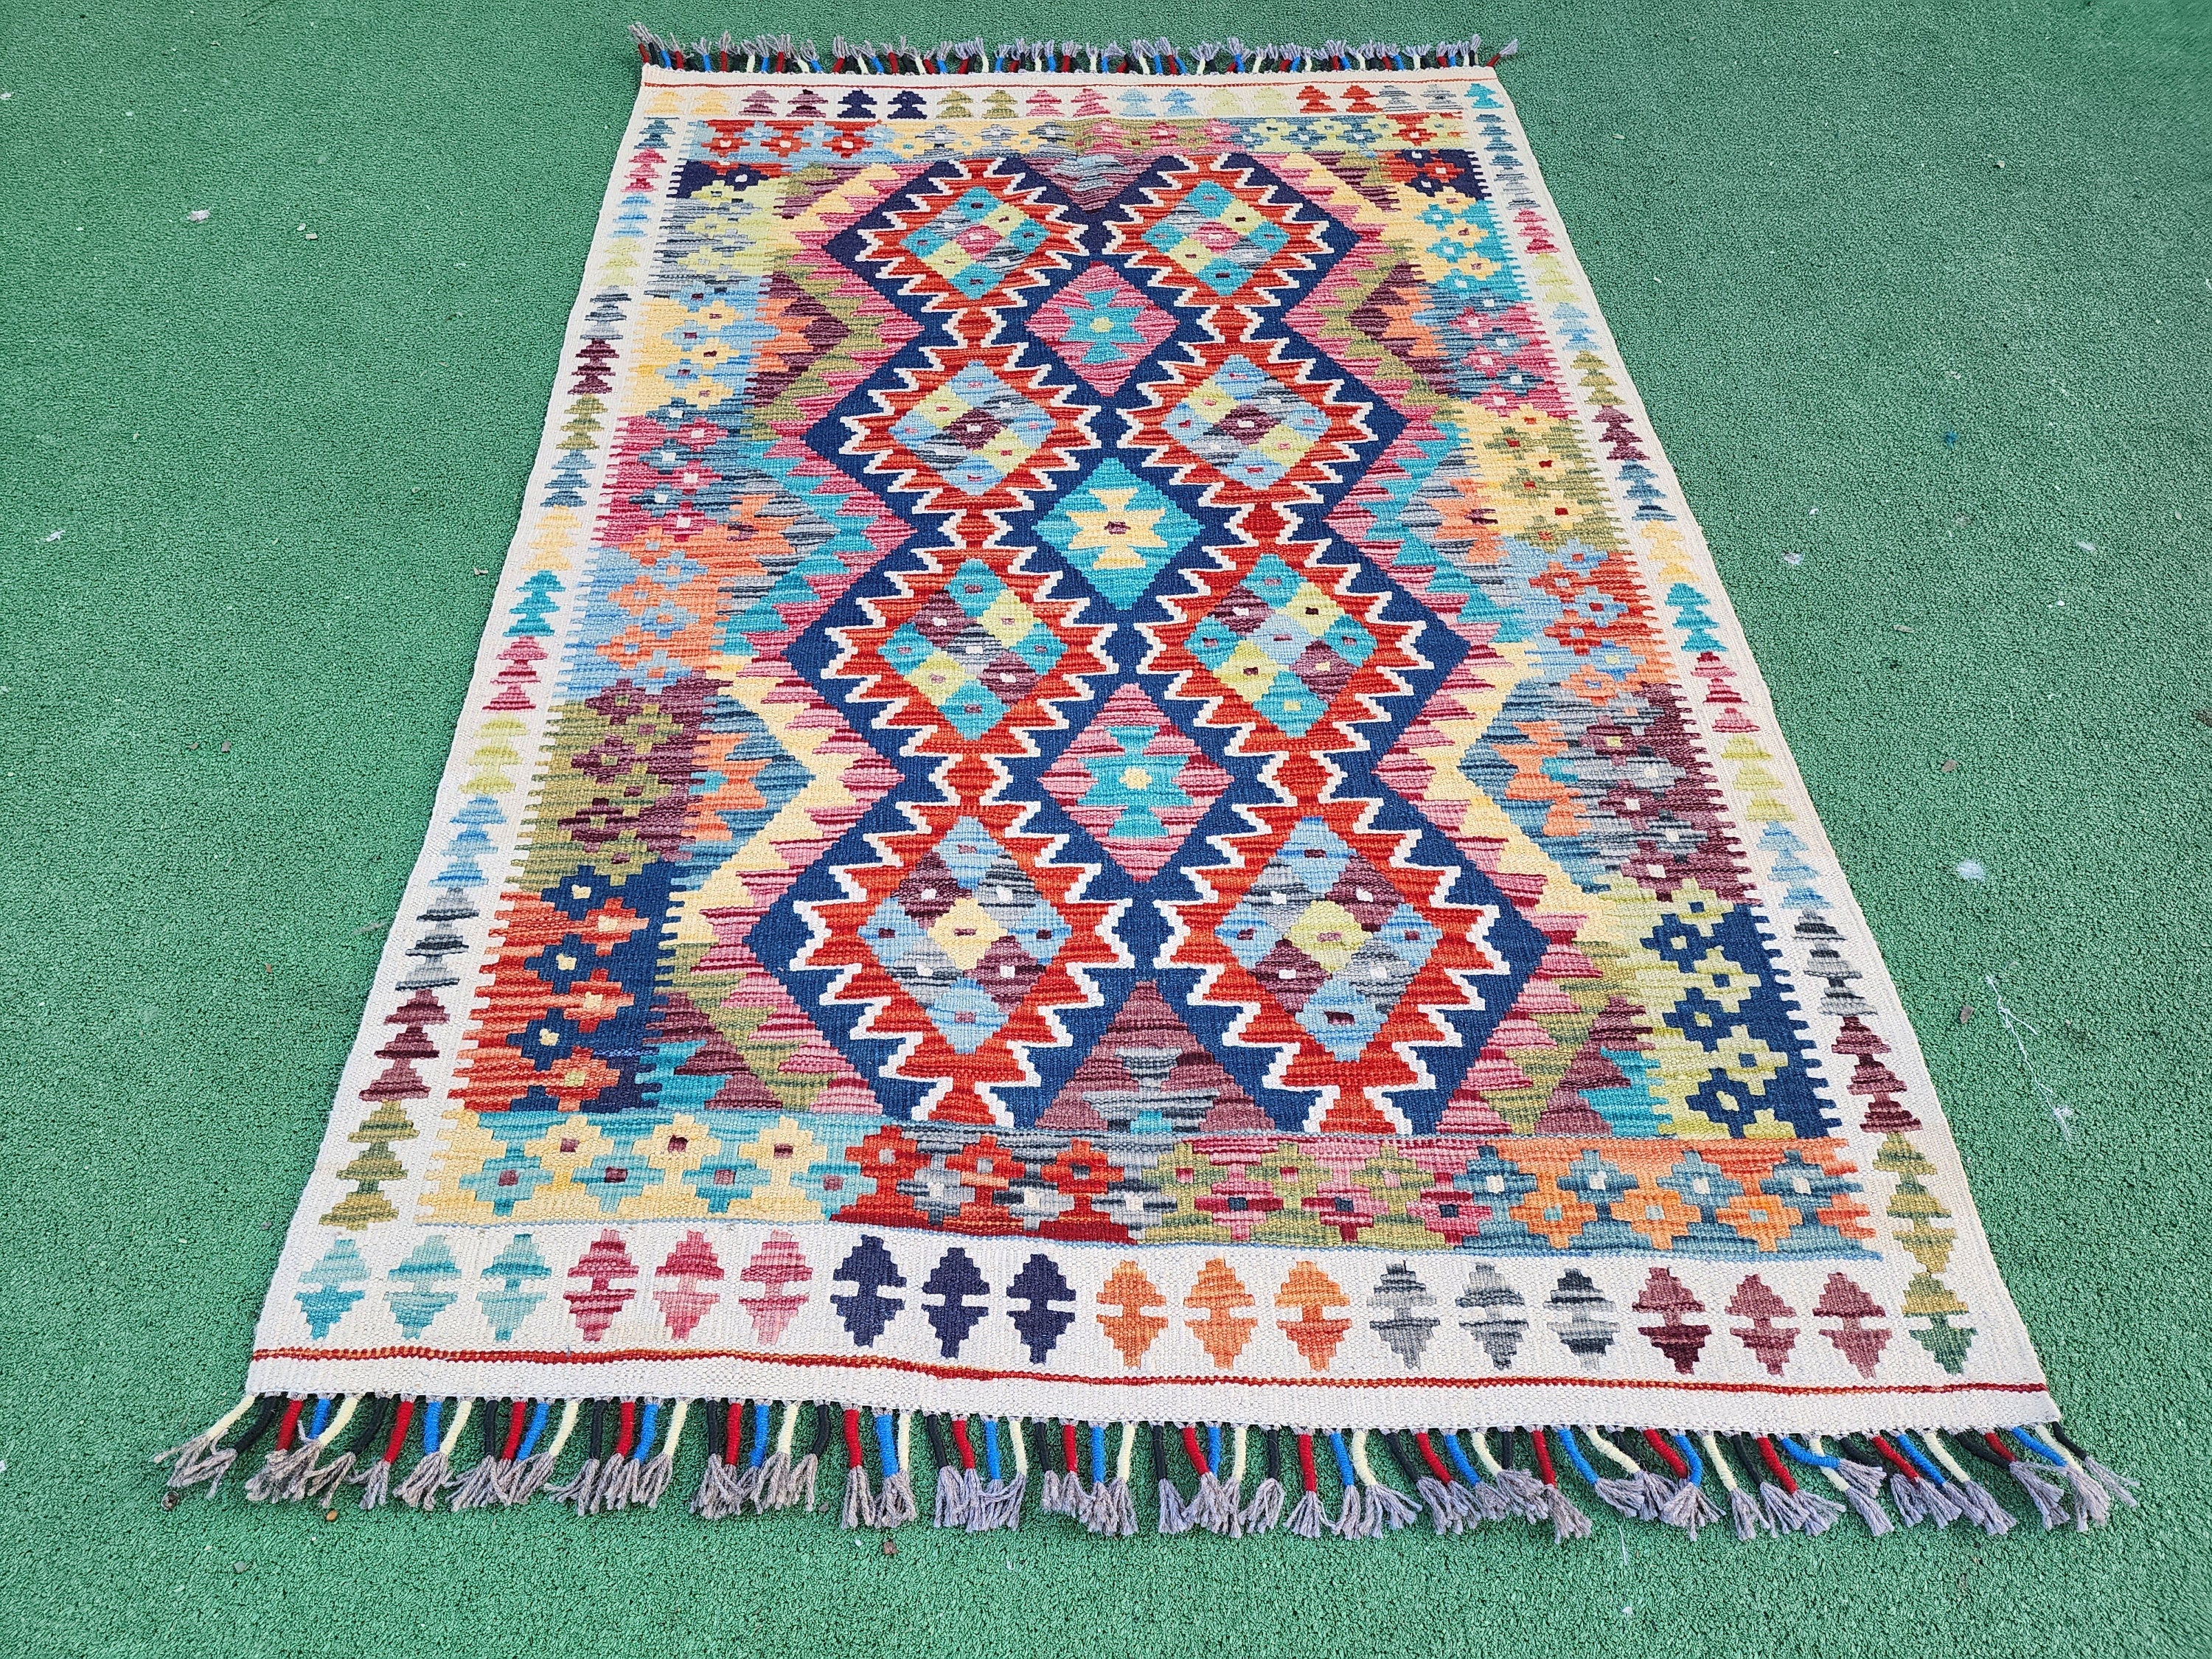 Afghan Maimana Kilim Rug, 5 ft x 3 ft 3 in, Rust Red, Blue, Brown and Off-White Turkish Kilim Rug